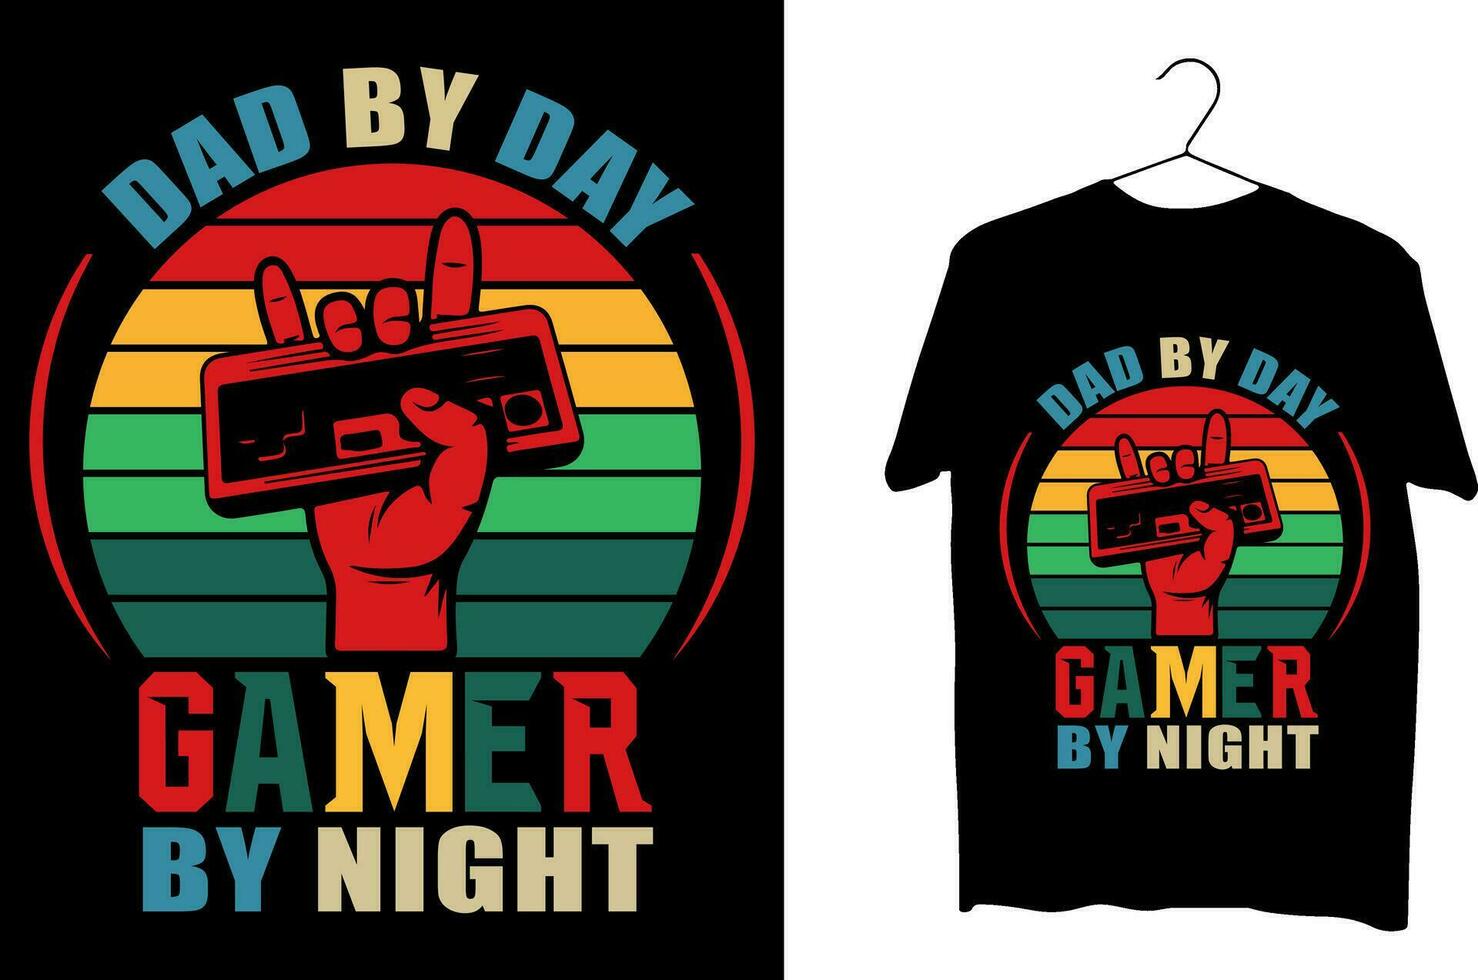 dad by day gamer by night T shirt design vector